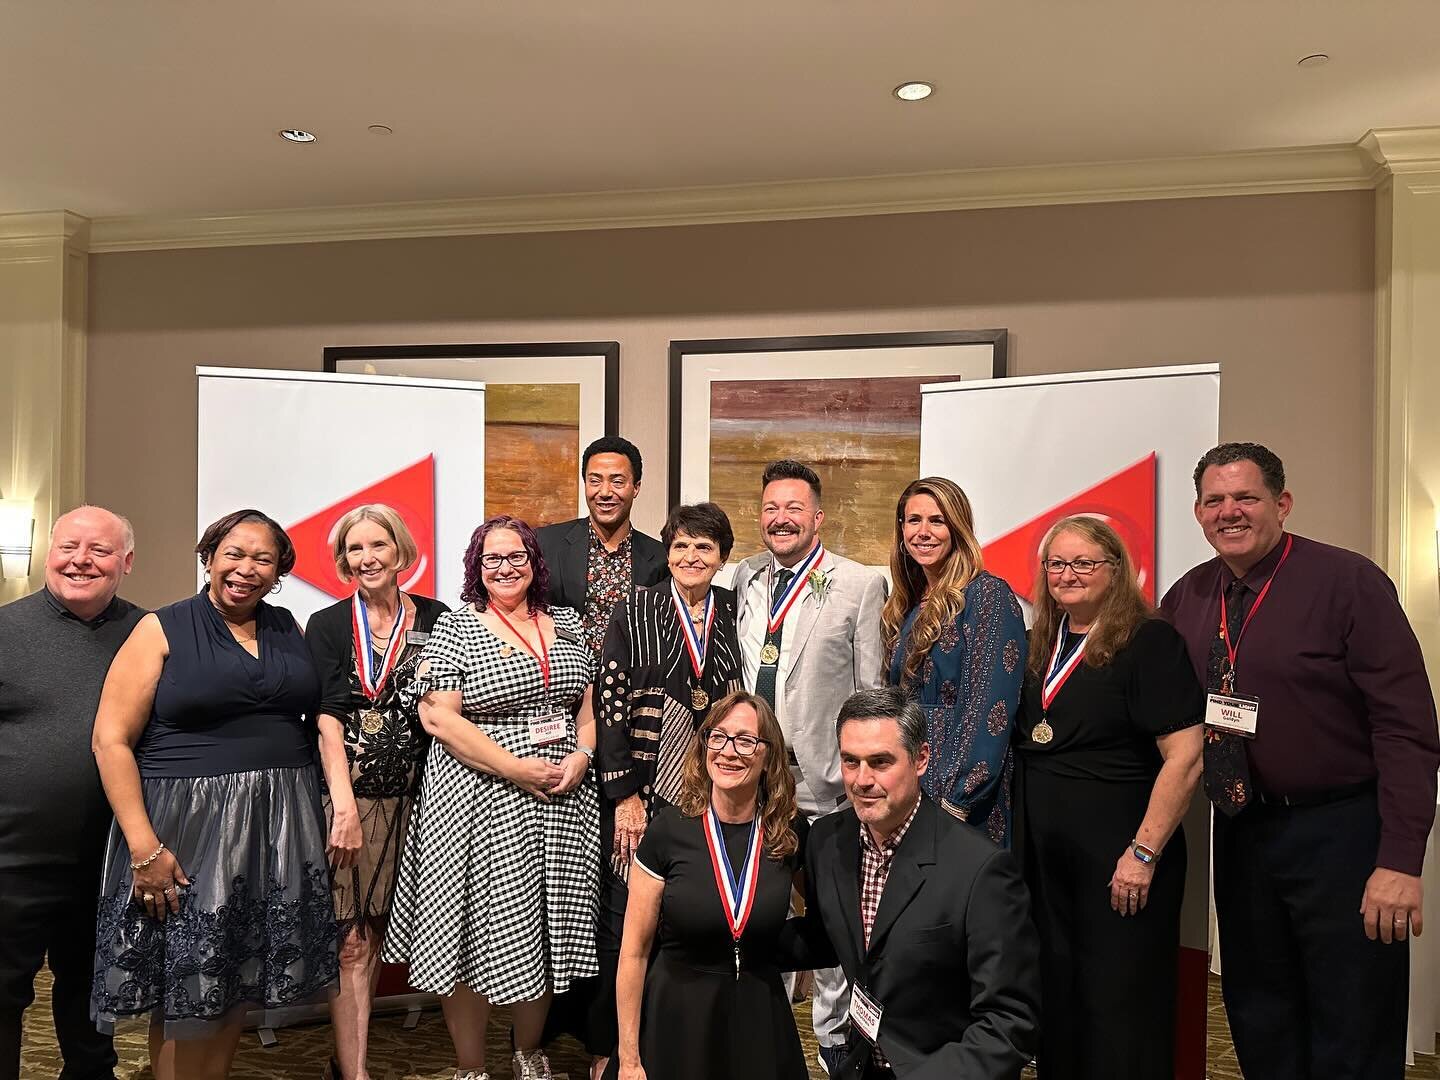 Our incredible CETA Board celebrating at our 2023 Teachers Conference! #theatrematters #ceta #theatreleaders #artseducation #theatreeducation